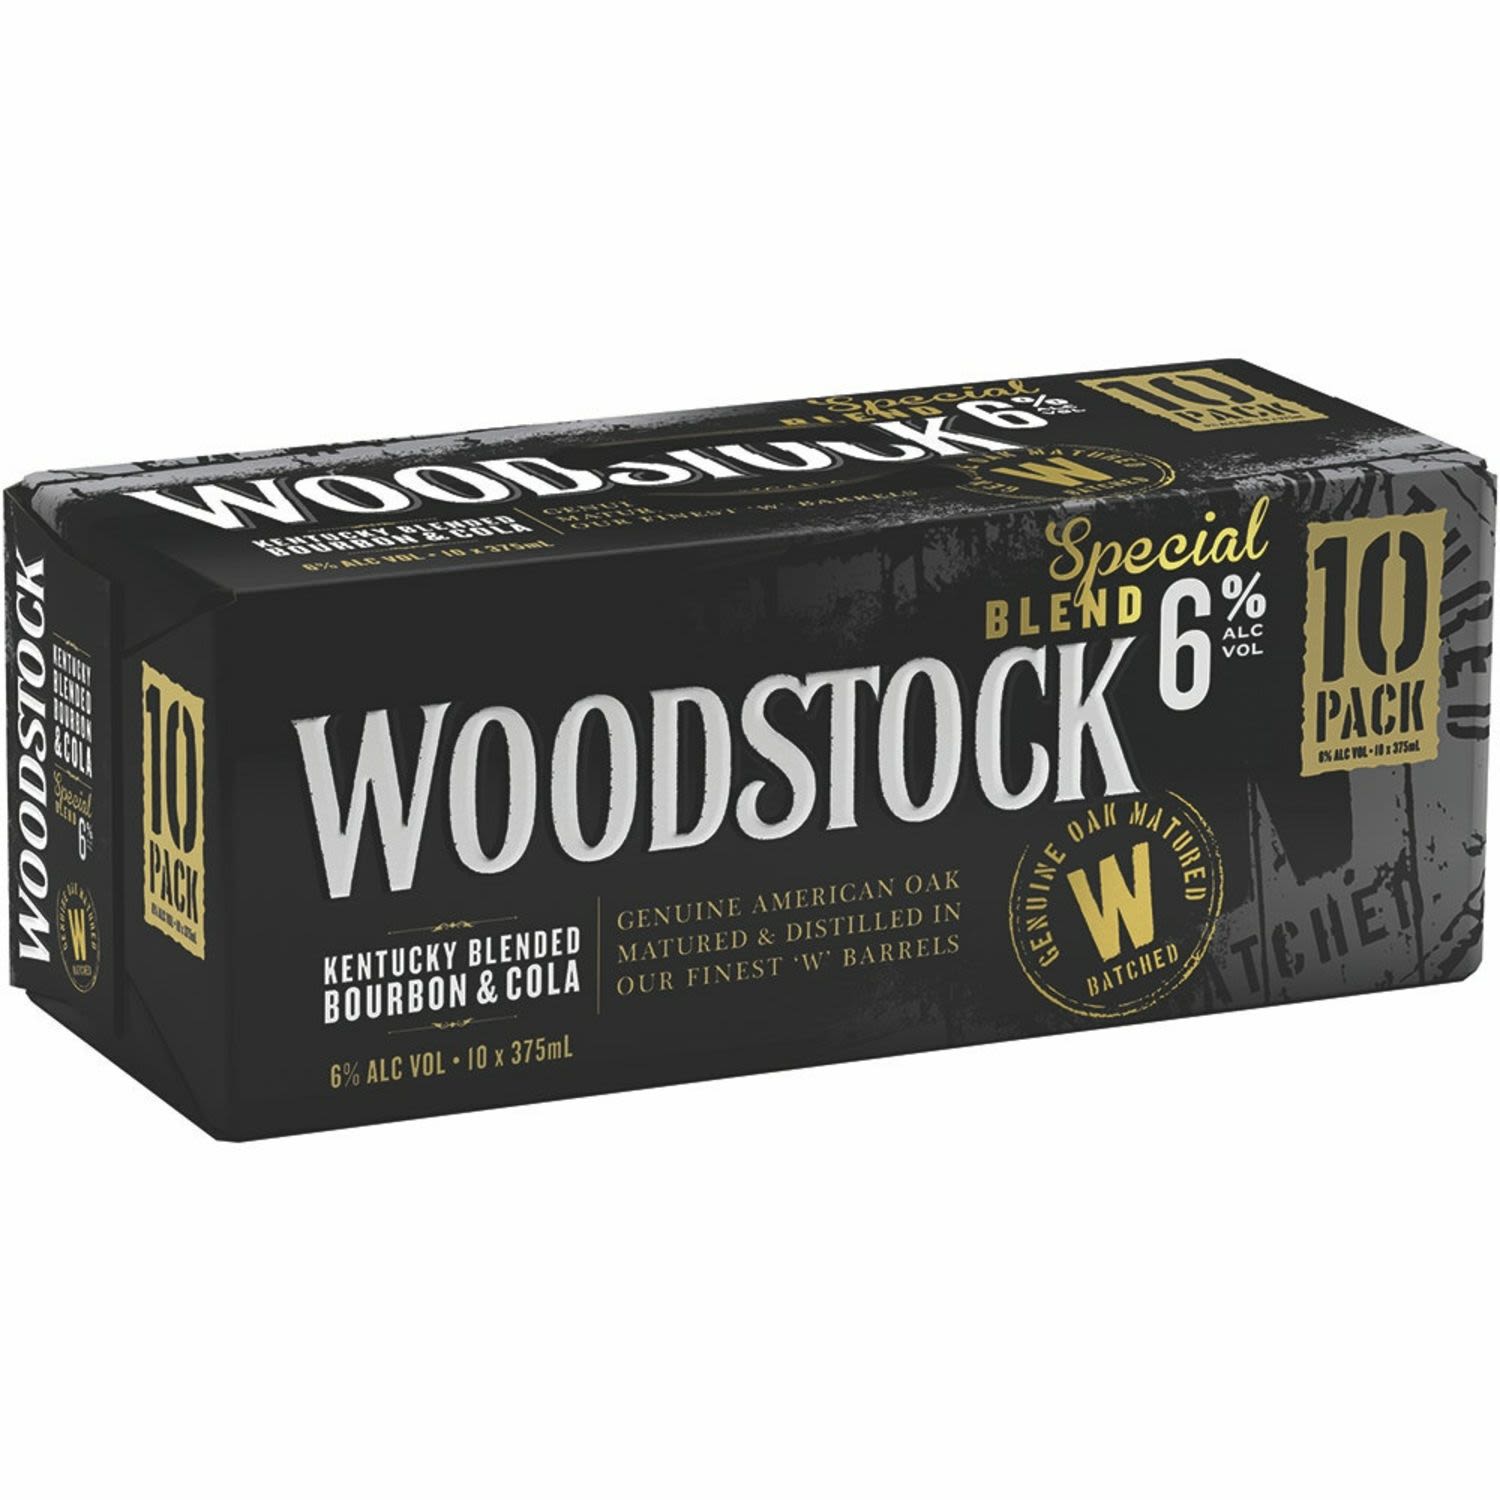 Woodstock Bourbon & Cola 6% Can 375mL 10 Pack